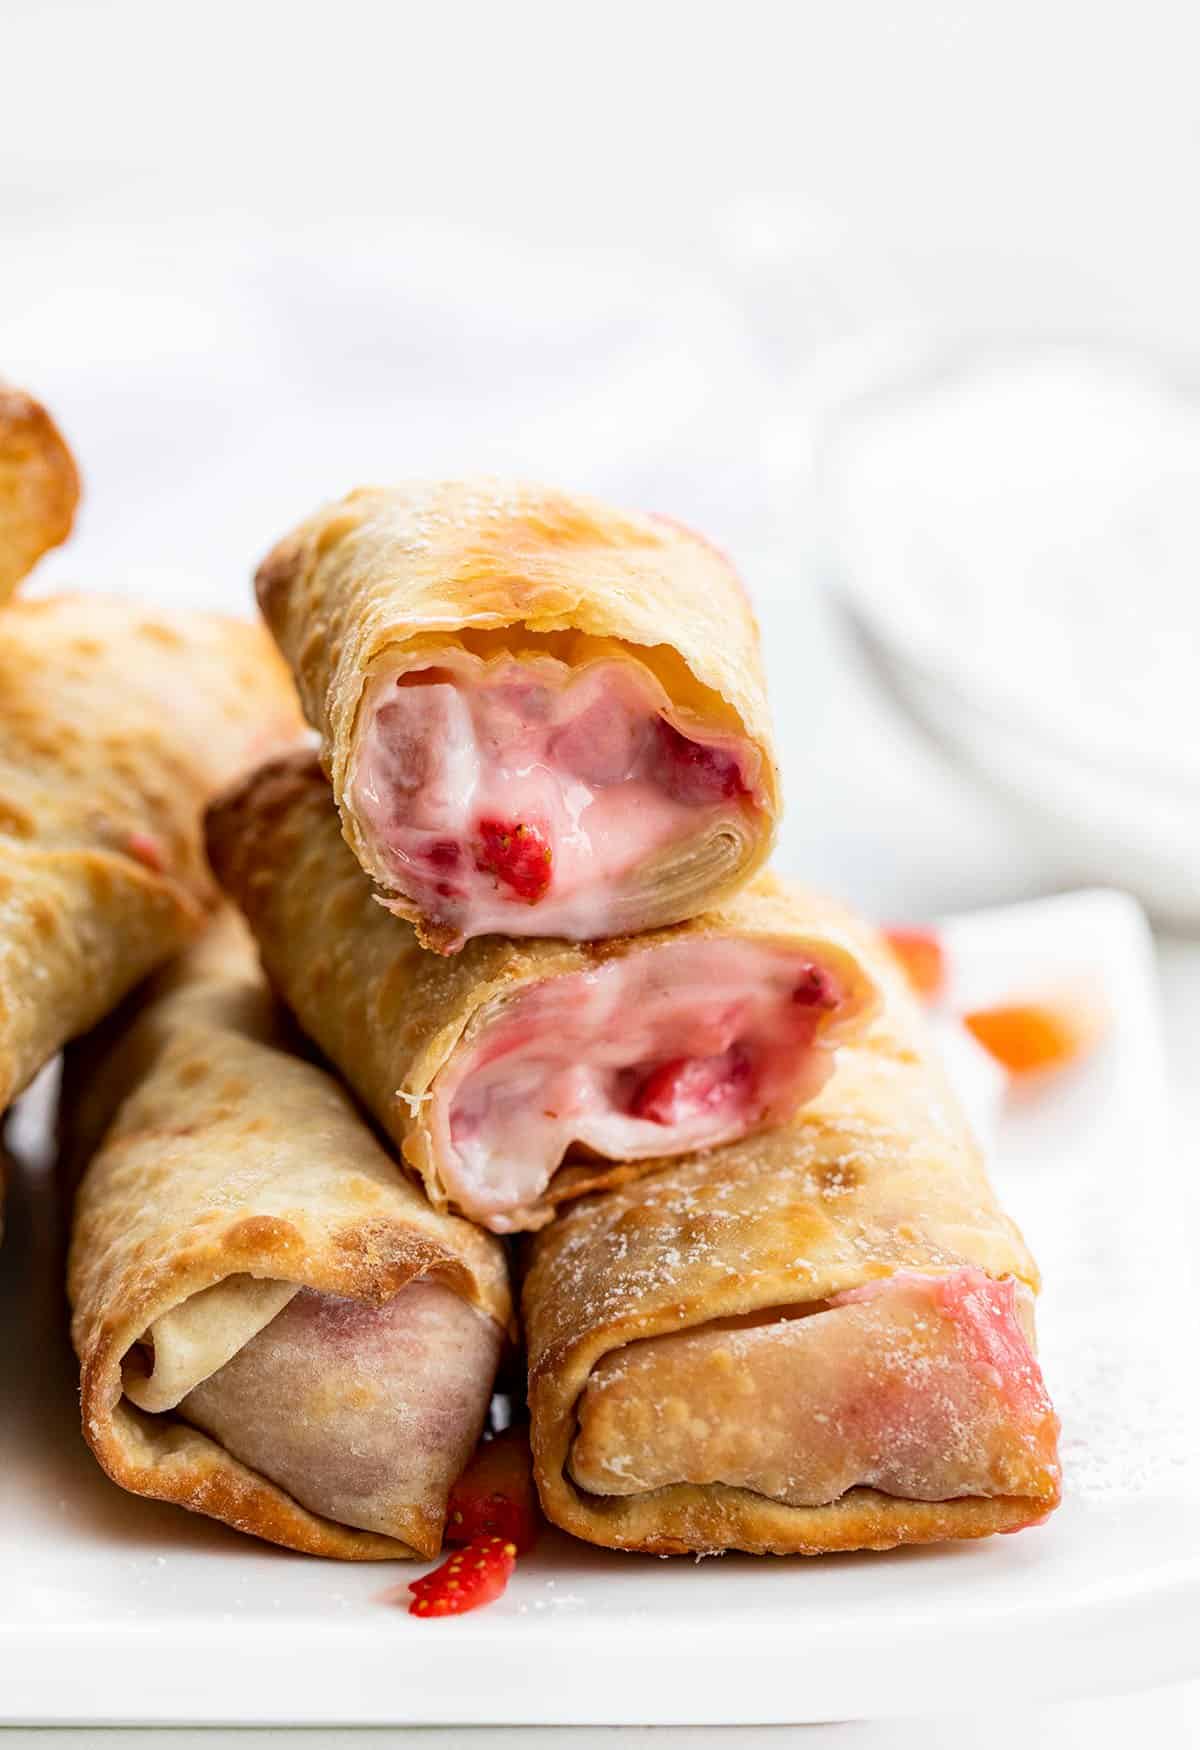 Strawberry Cheesecake Egg Rolls Stacked on a White Plate and Broken in Half Showing the Inside